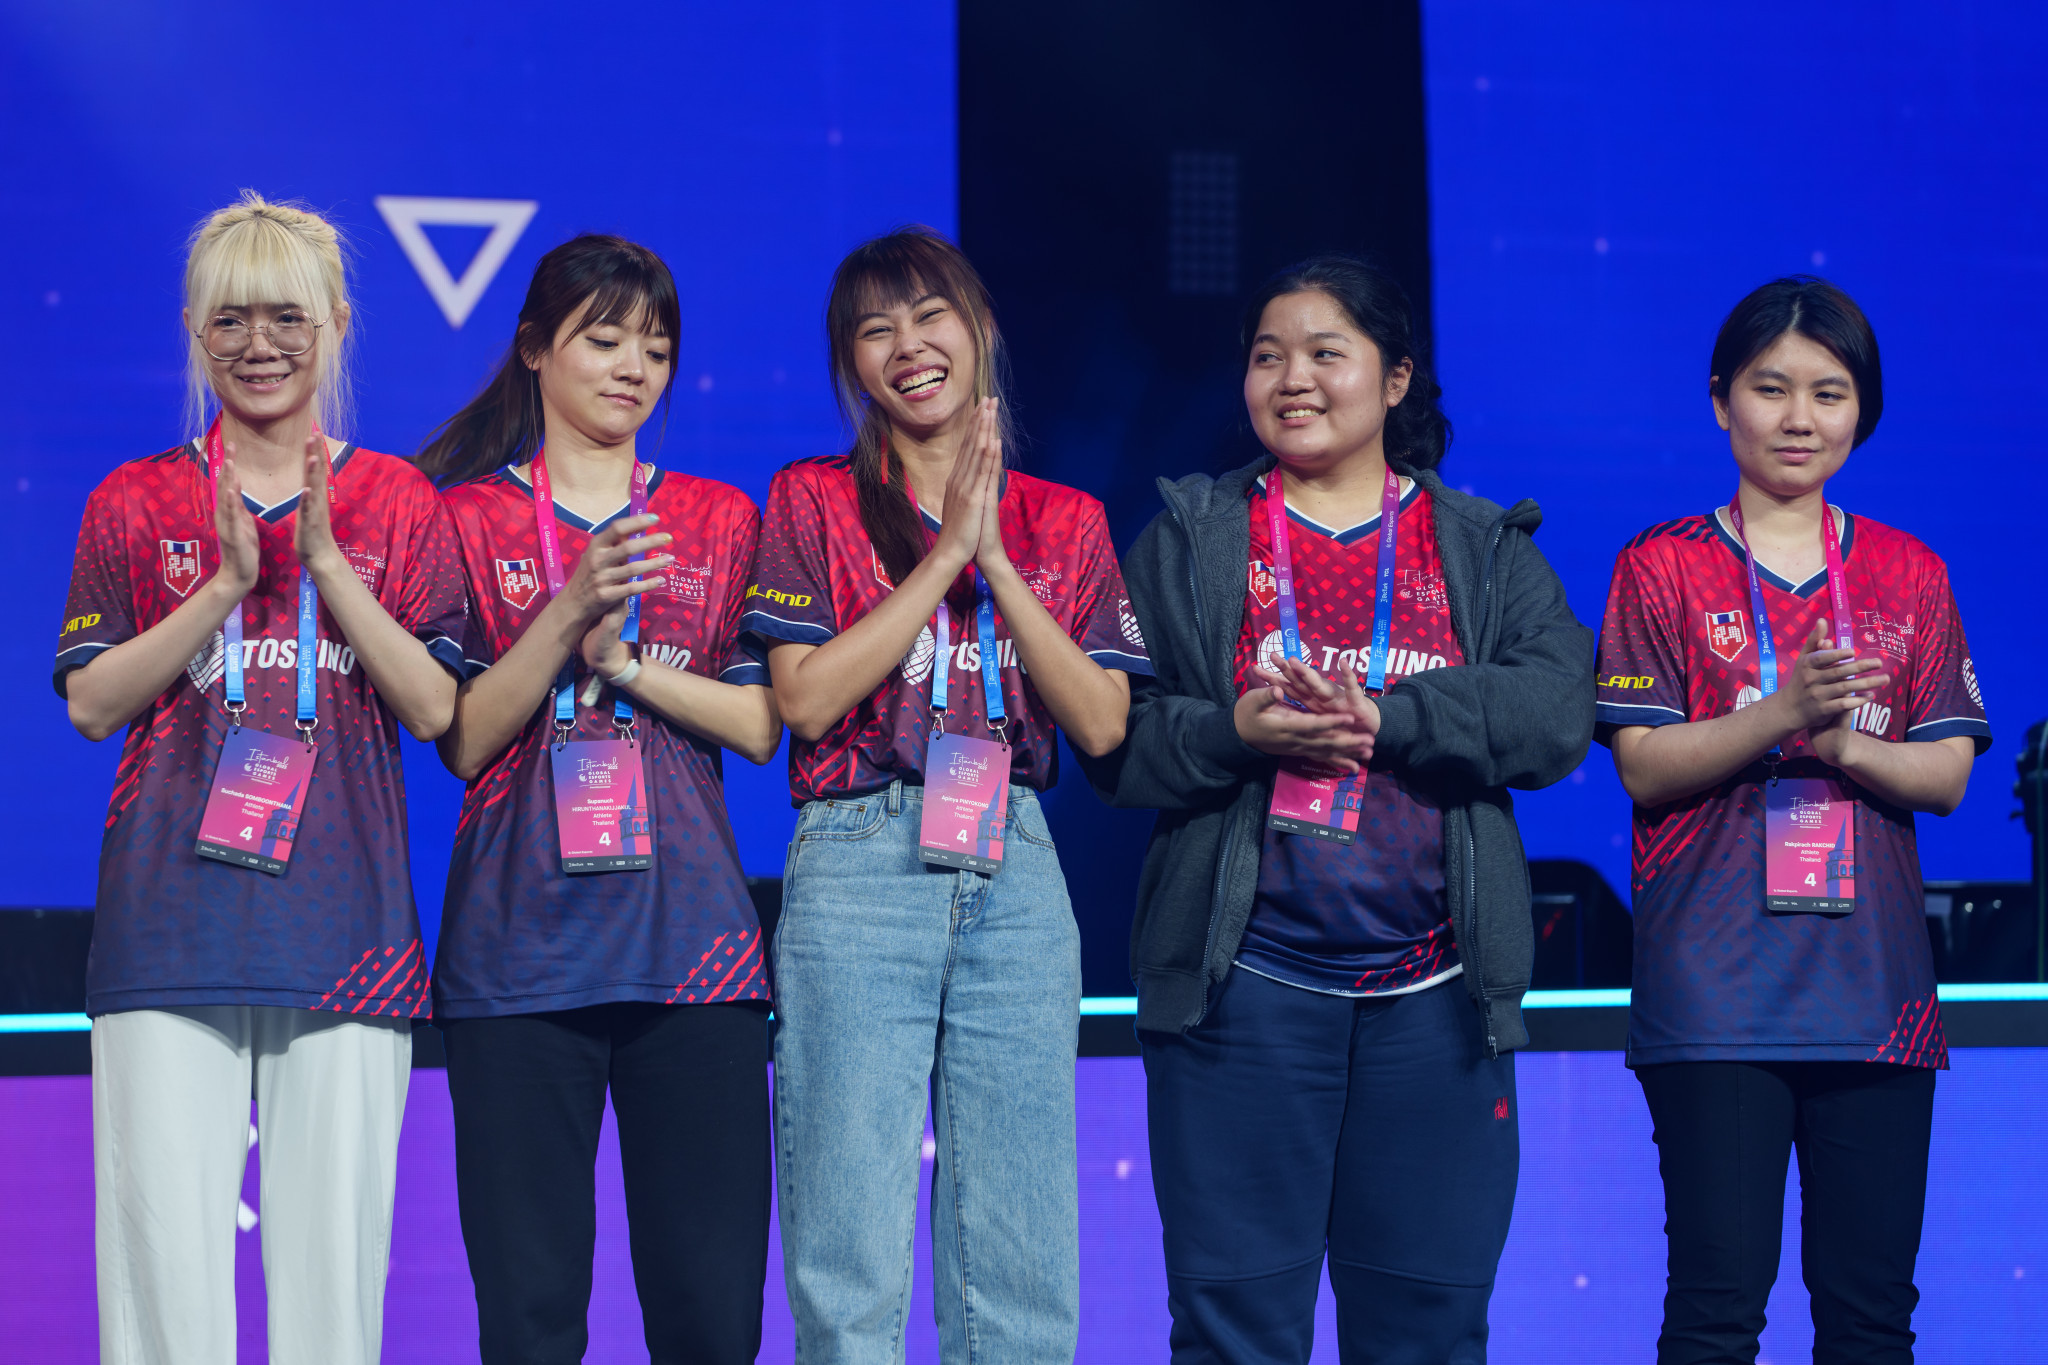 Thailand beat Malaysia 2-0 in the women's DOTA 2 final following a stunning late comeback in the second game to clinch gold ©GEF